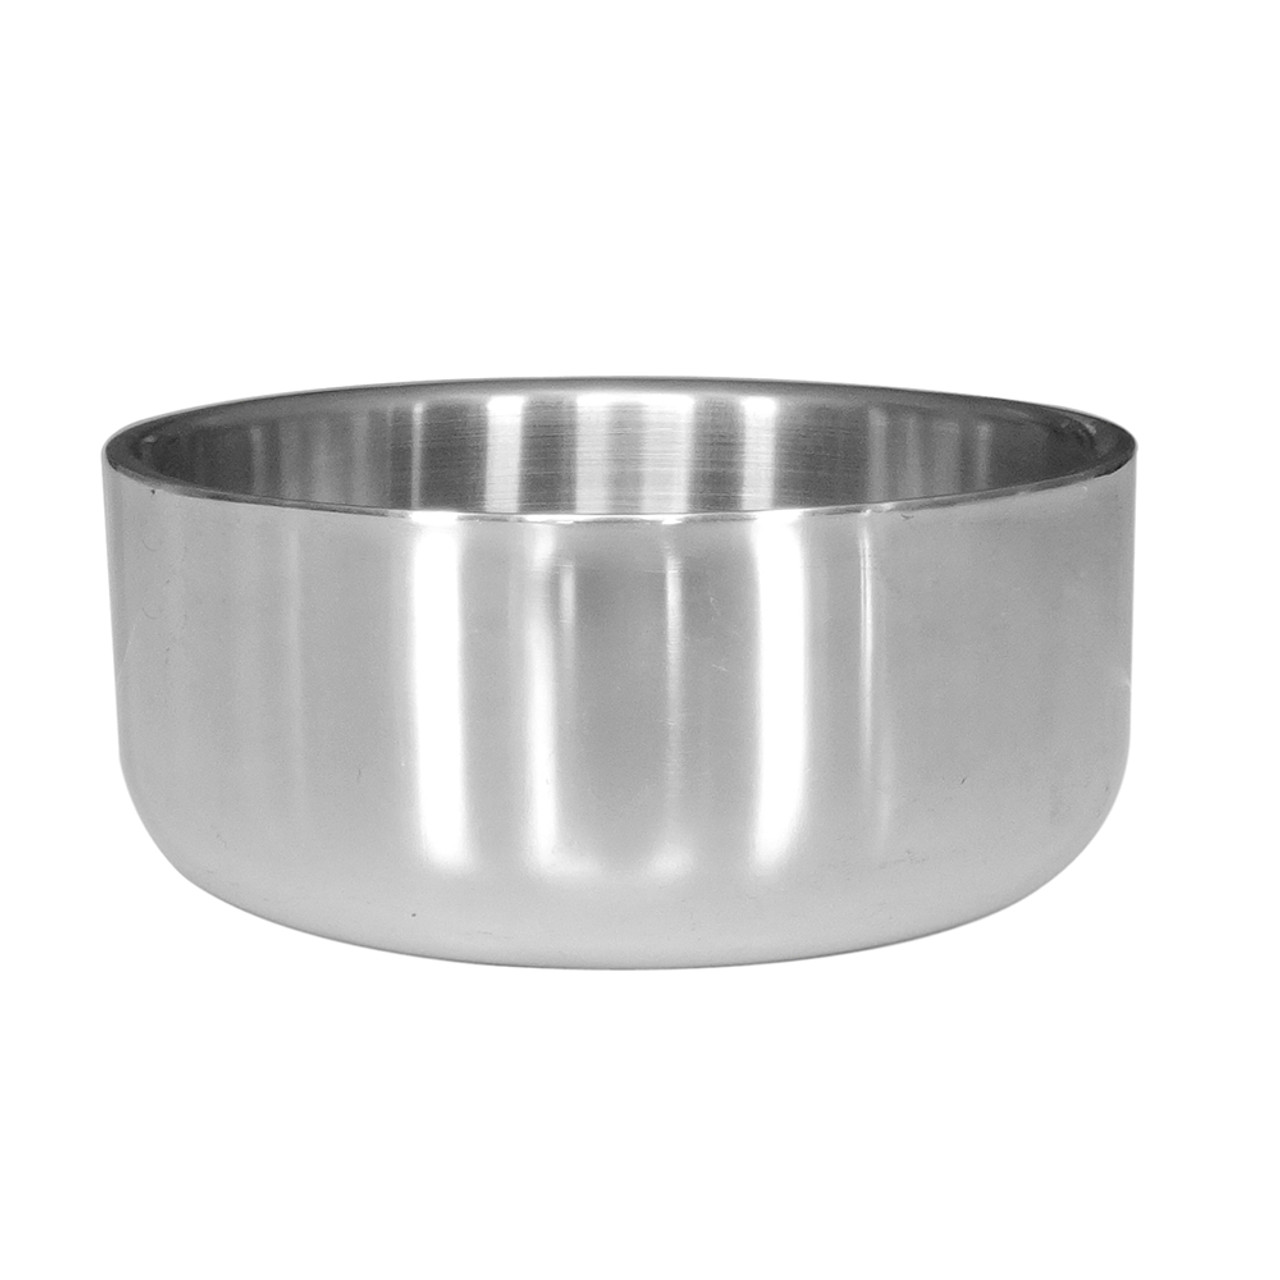 ikea stainless steel mixing bowls